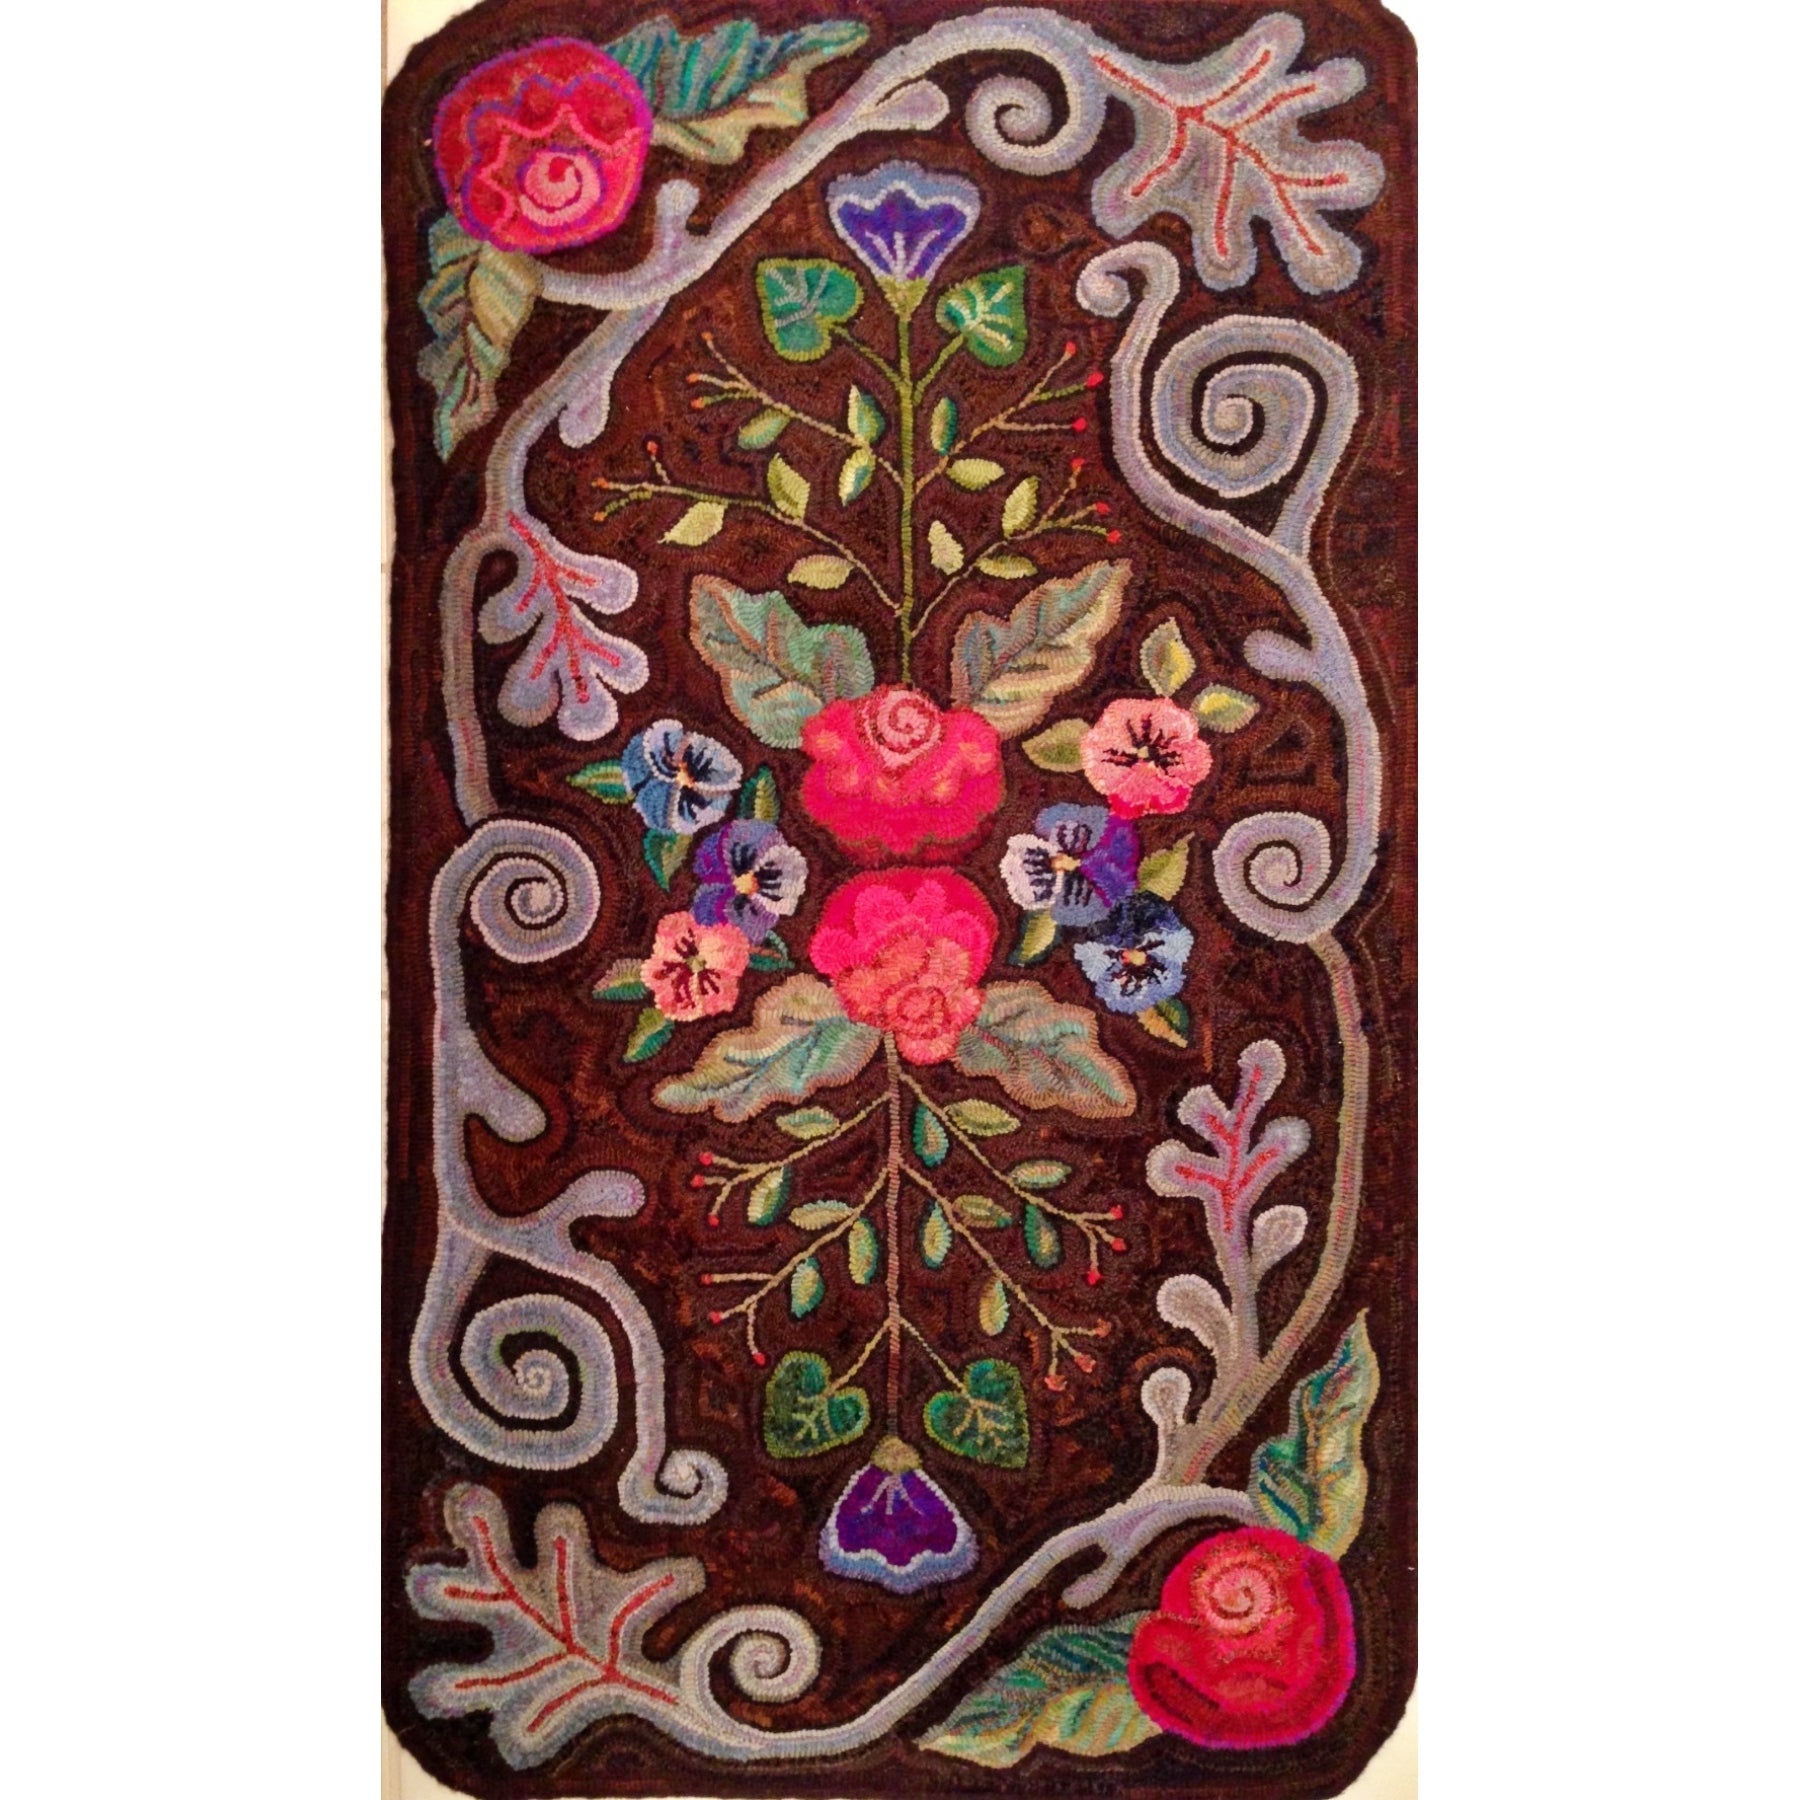 Chatham Rose, rug hooked by Gina Paschal